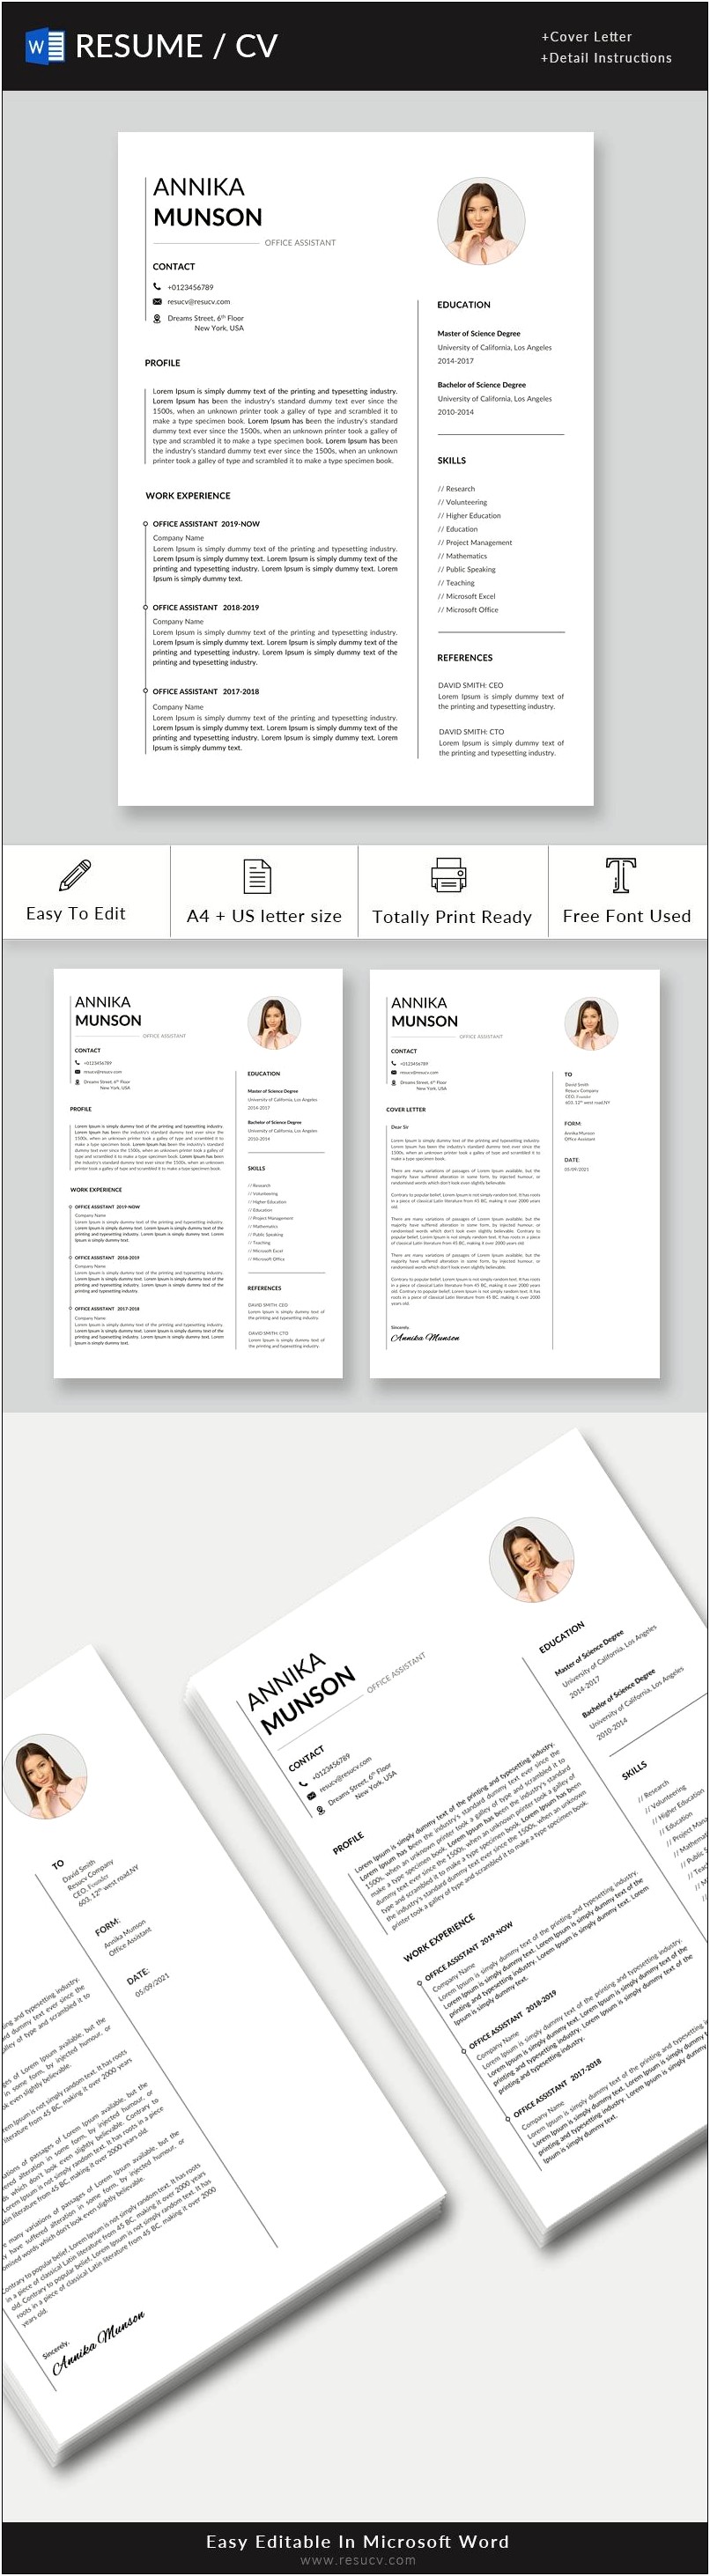 Sample Resume Format For Administrative Assistant